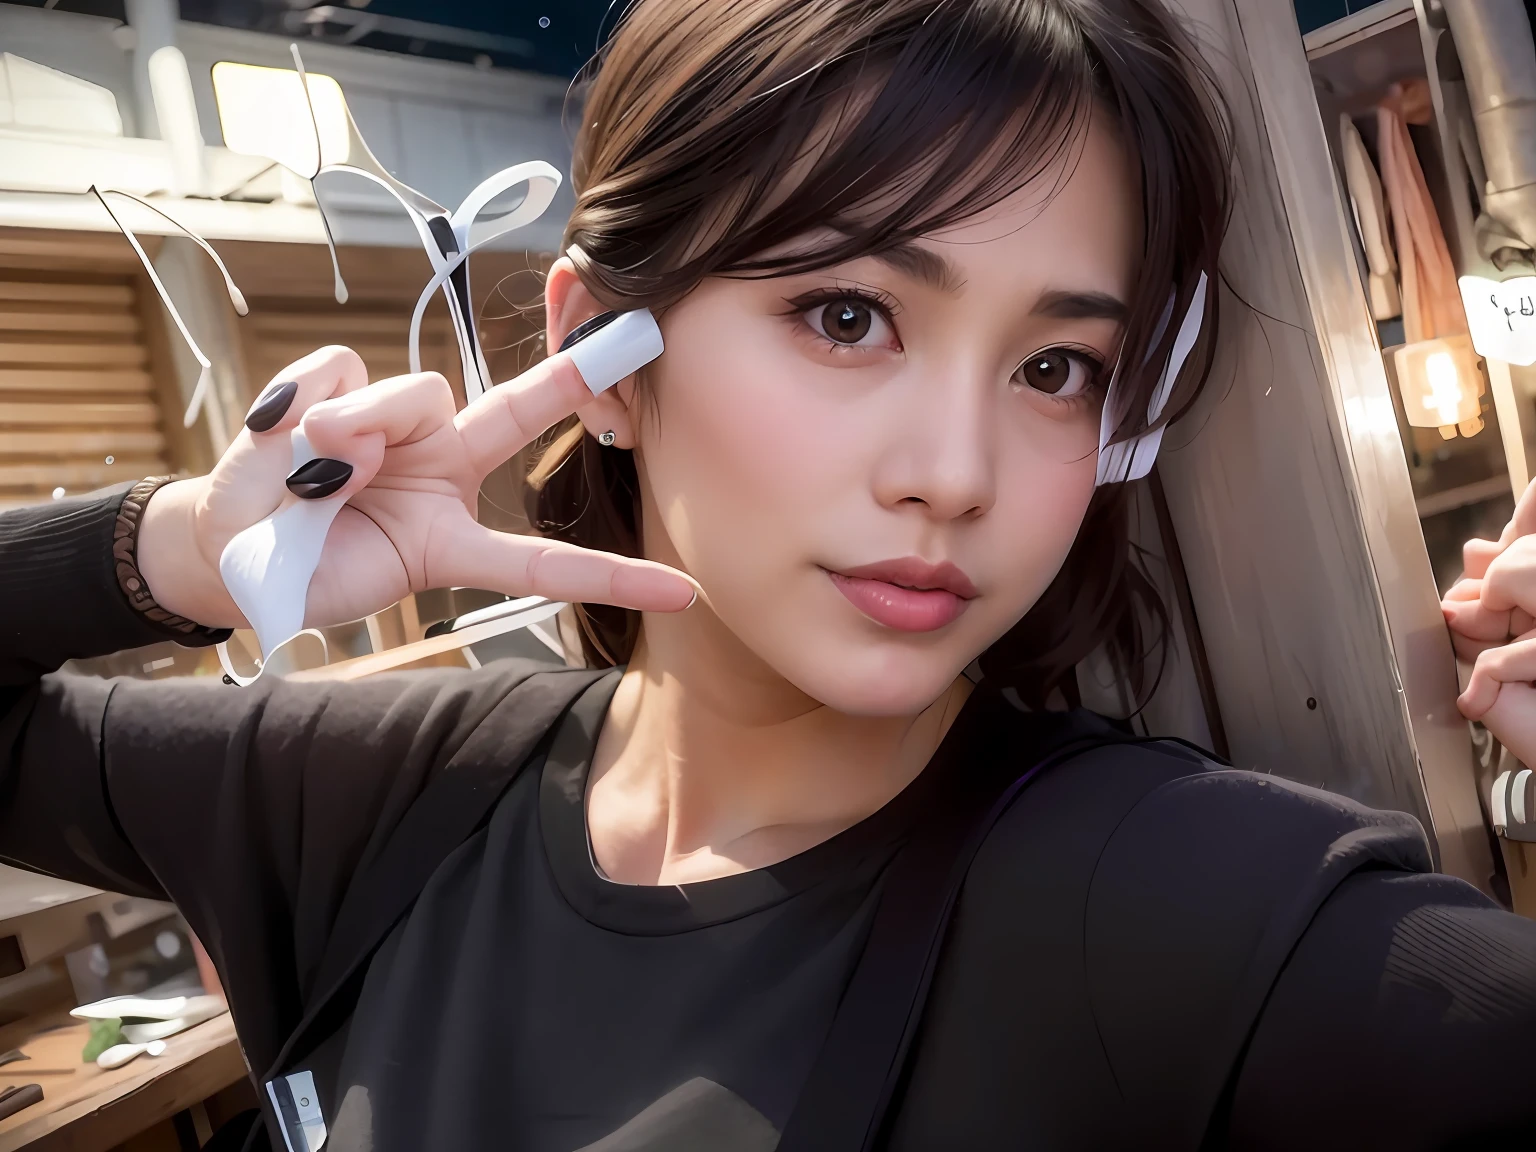 (Extremely detailed Cg Unity 8K wallpaper), (Masterpiece), (Best quality), (Ultra-detailed), (Best Illustration), (Best shadow), (Photorealistic:1.6), Real human skin, Lens flare, Shade, back lit lighting, full bloom, Depth of field, Natural lighting, hardfocus, filmgrain, Look at the viewer, Asian, Kpop idol:1.2, mix4, 1 girl, 21 I, Solo, Skinny, Pale skin, Soft lips, (light eyebrows:1.4),Shiny brown eyes, Black straight hair, Small breasts, Beautiful detailed sky, street(crowd:1.2), Night, (nose blush),  Beautiful detailed eyes, White Japanese school uniform, Sailor suit, Black pleated skirt, Stockings, Sneakers, cheerfulness, Smile